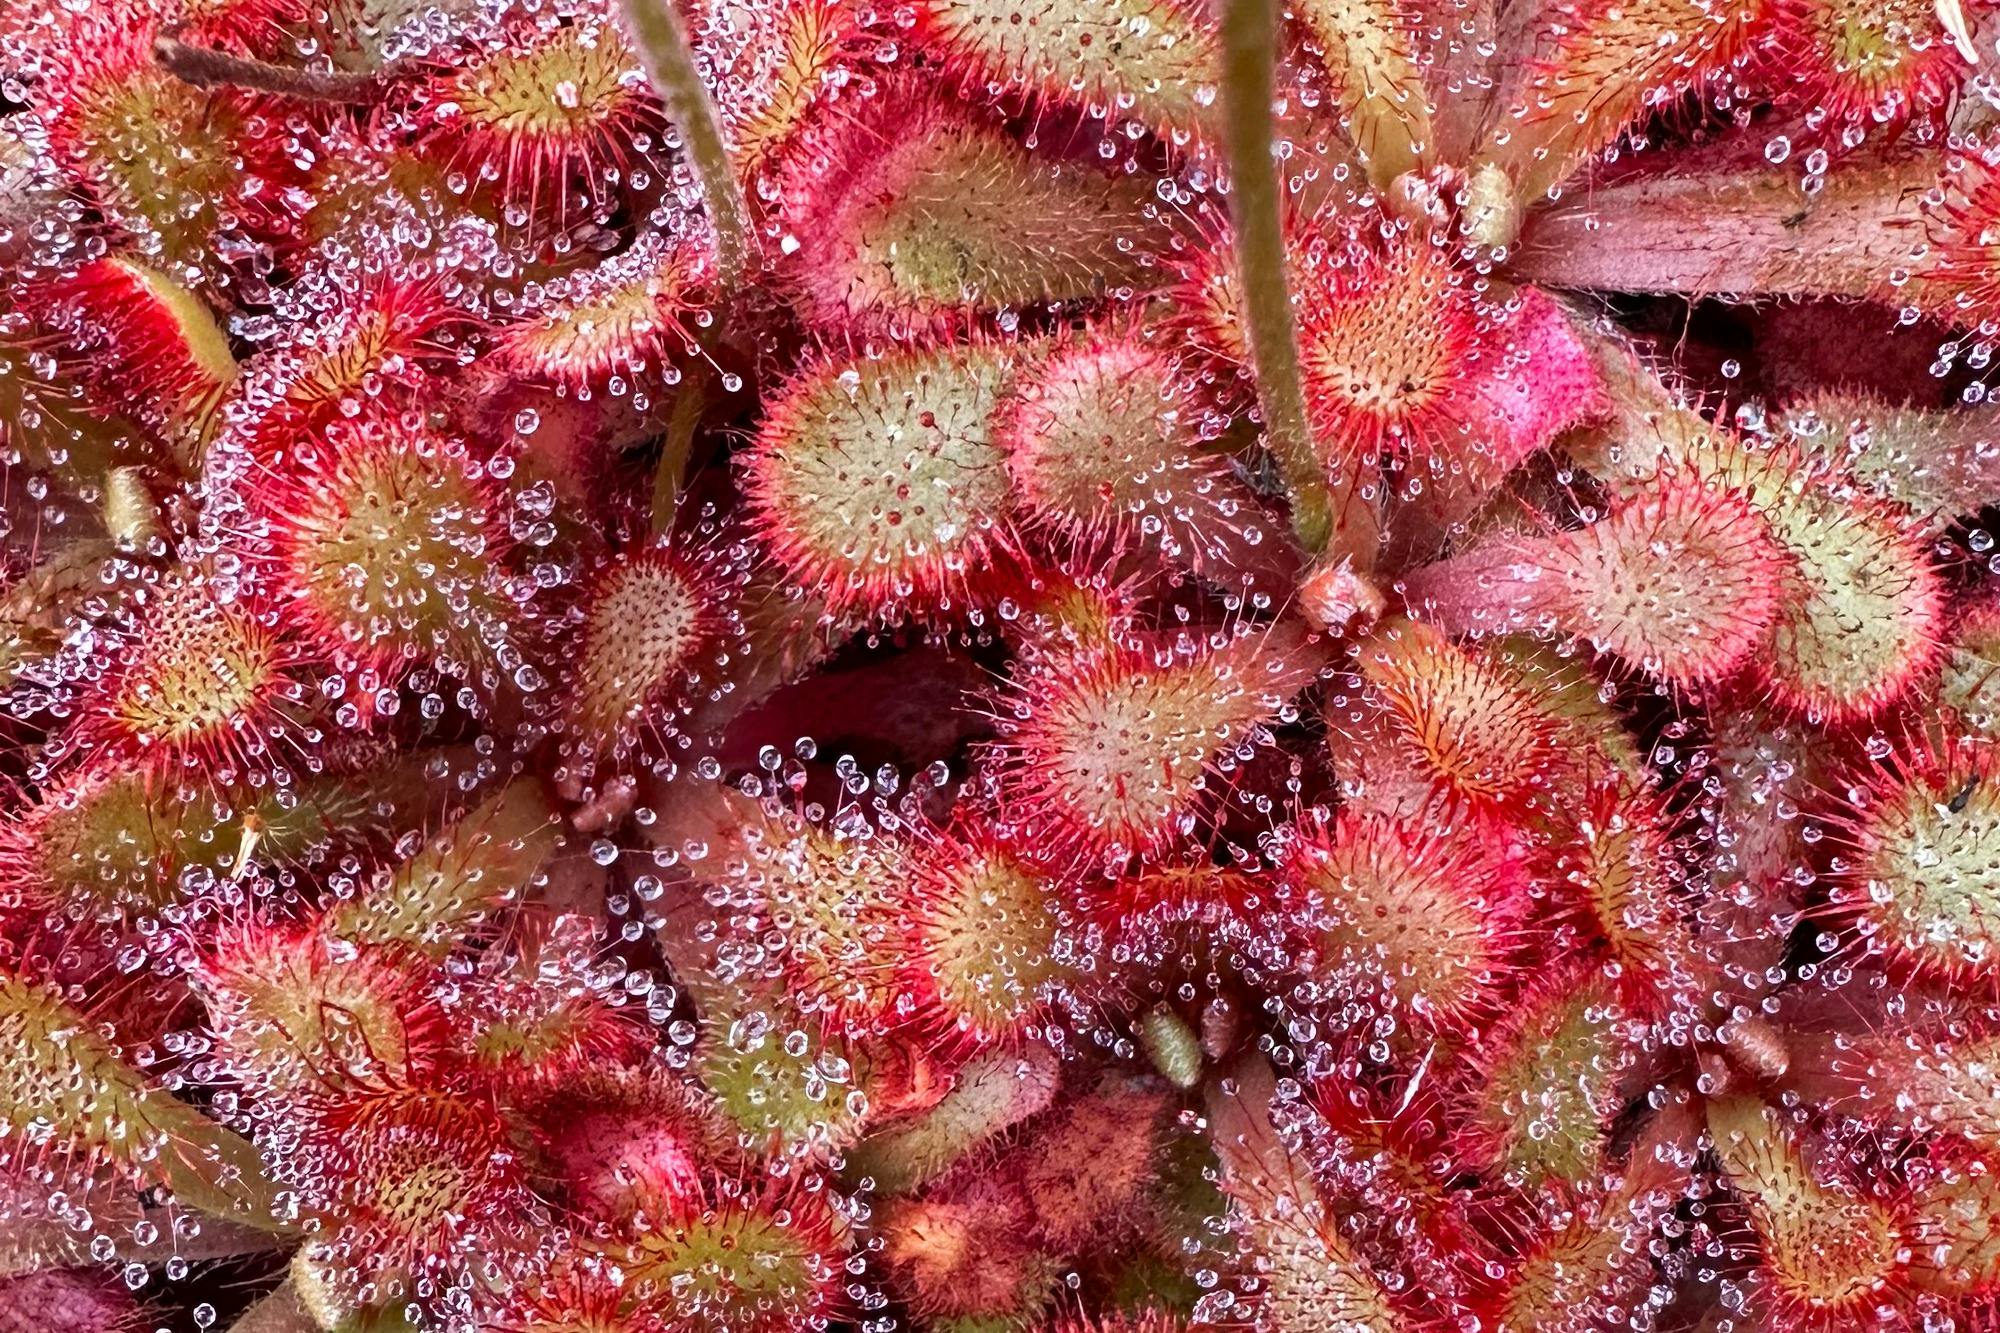 Sundew with drops of digestive liquid